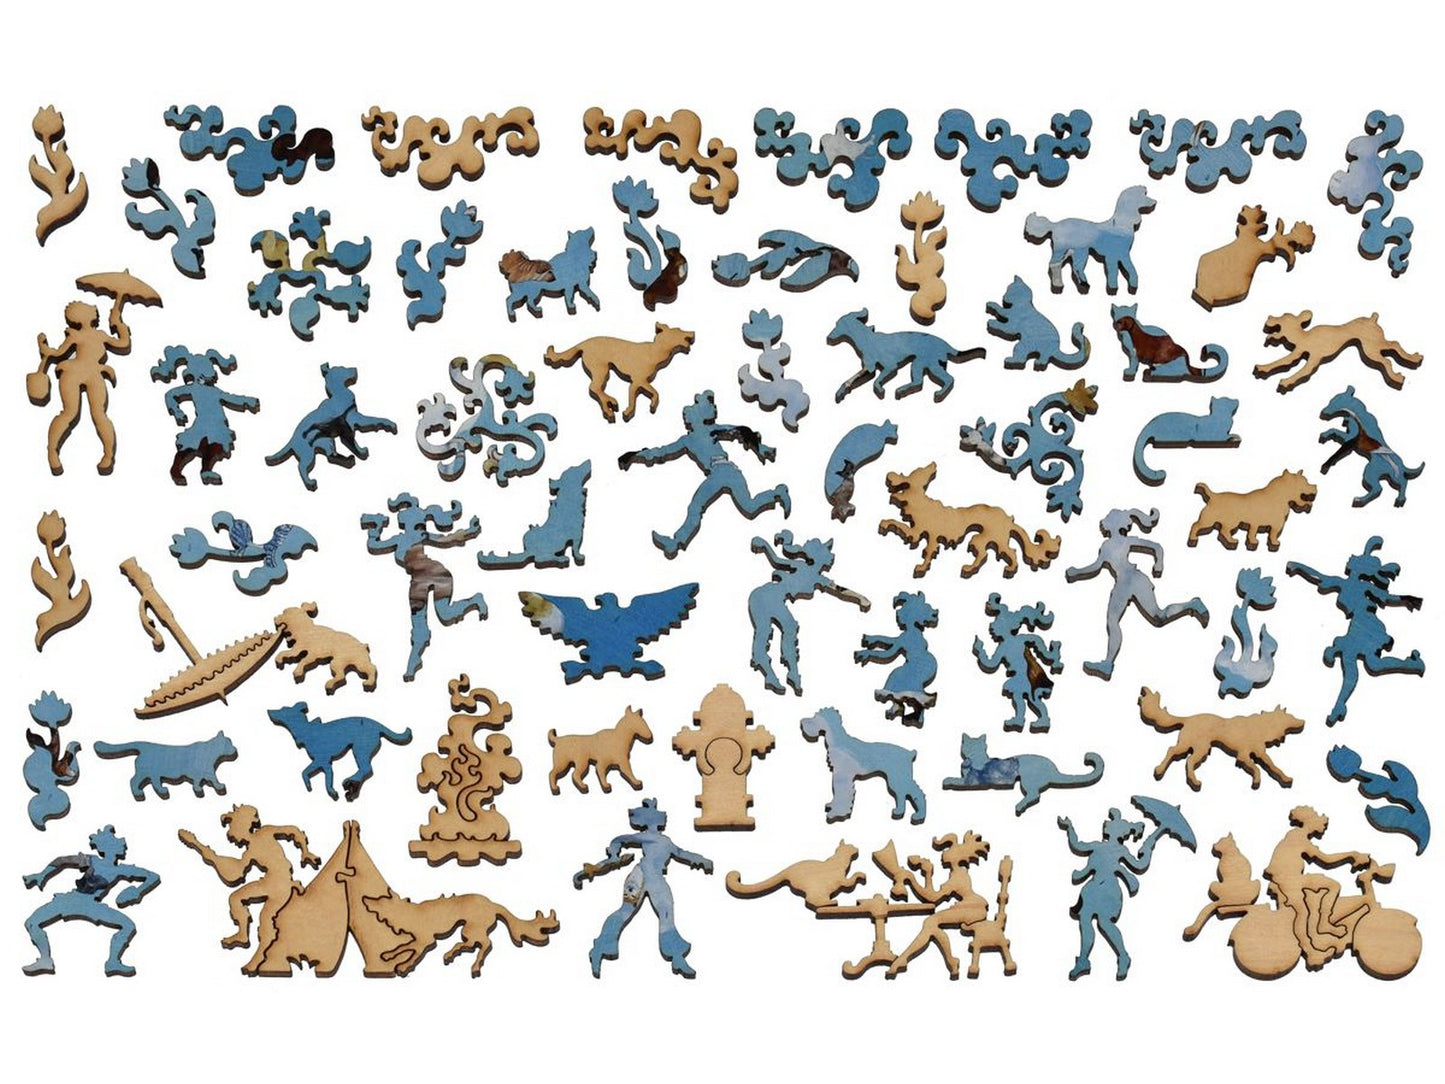 The whimsies that can be found in the puzzle, It's Raining Cats and Dogs.